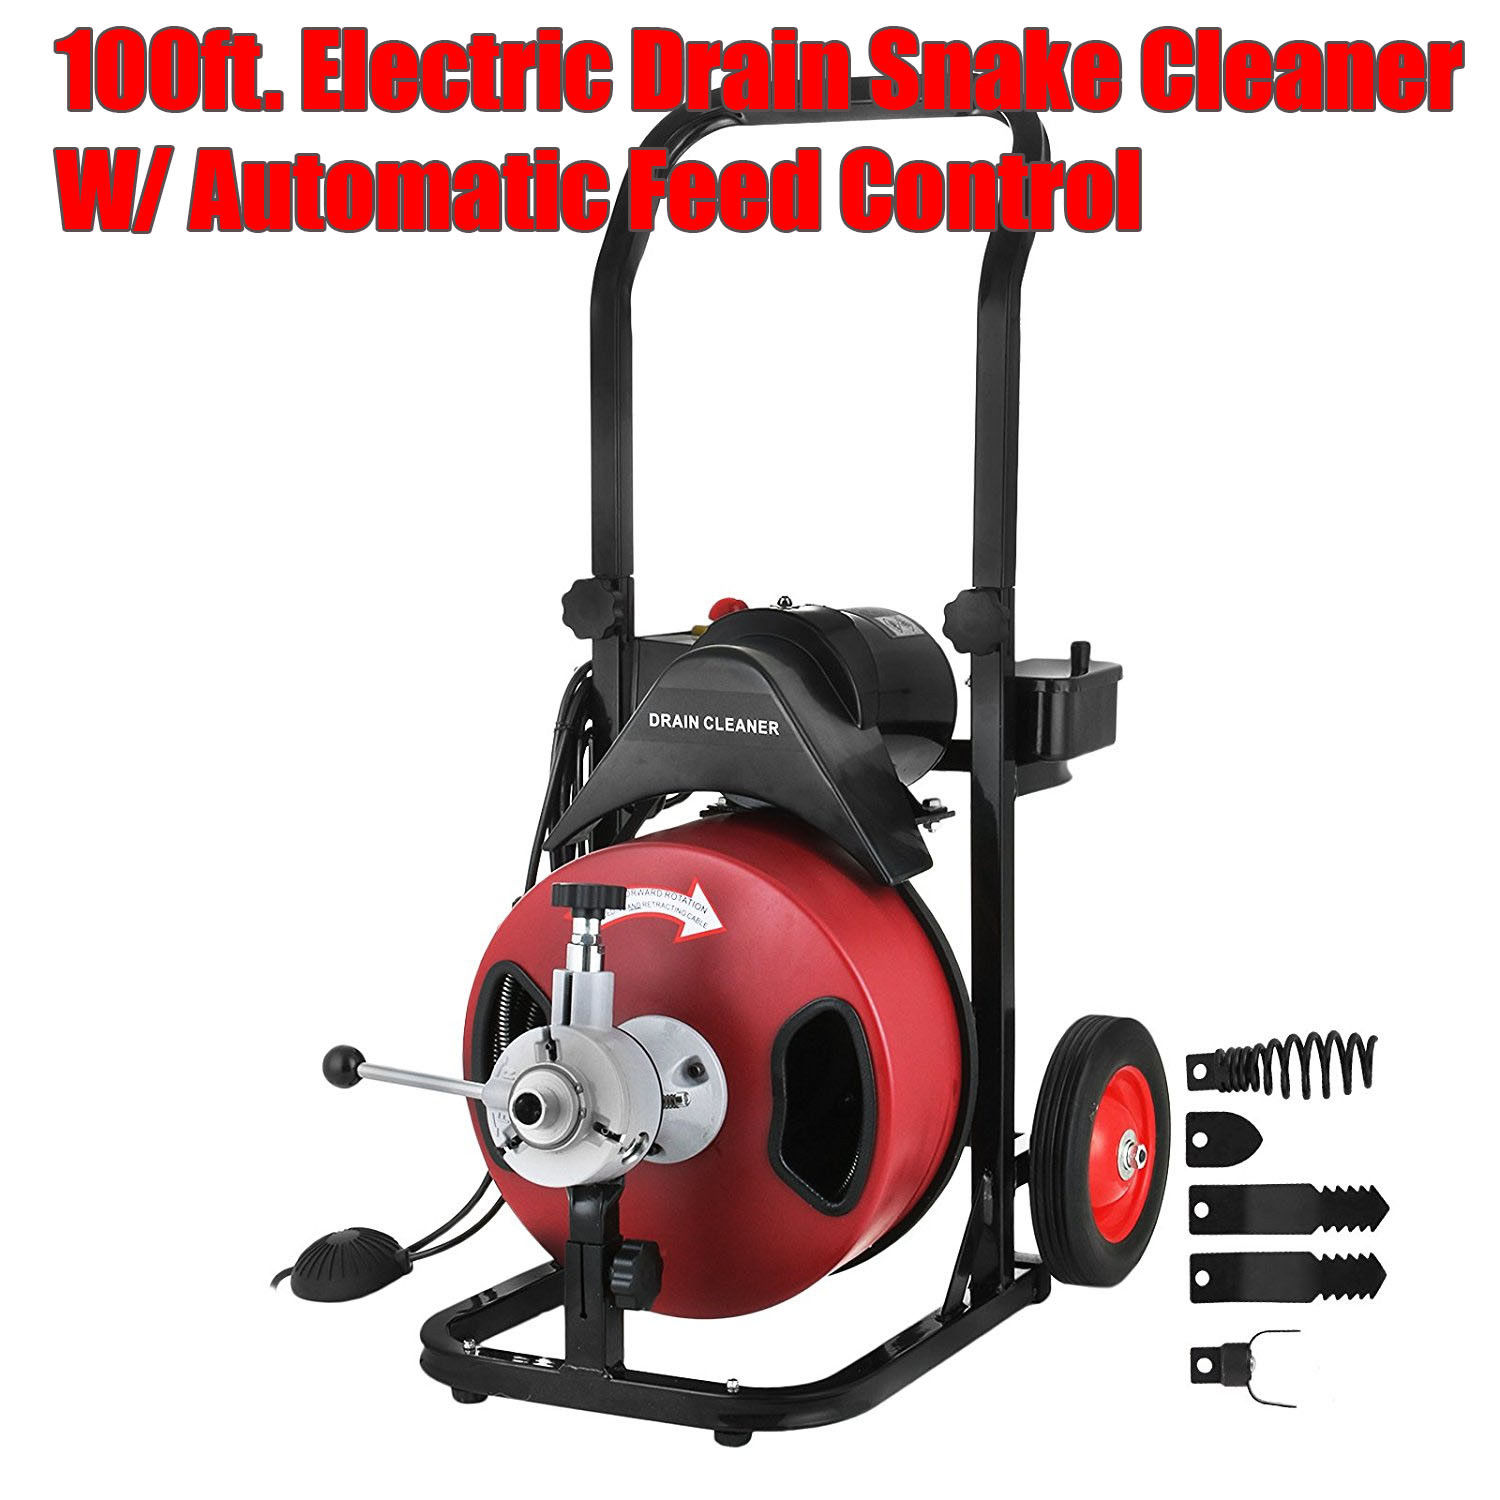 Commercial 100FT Electric Drain Auger Snaker Cleaner Plumbing 3/8" Cable Cut 